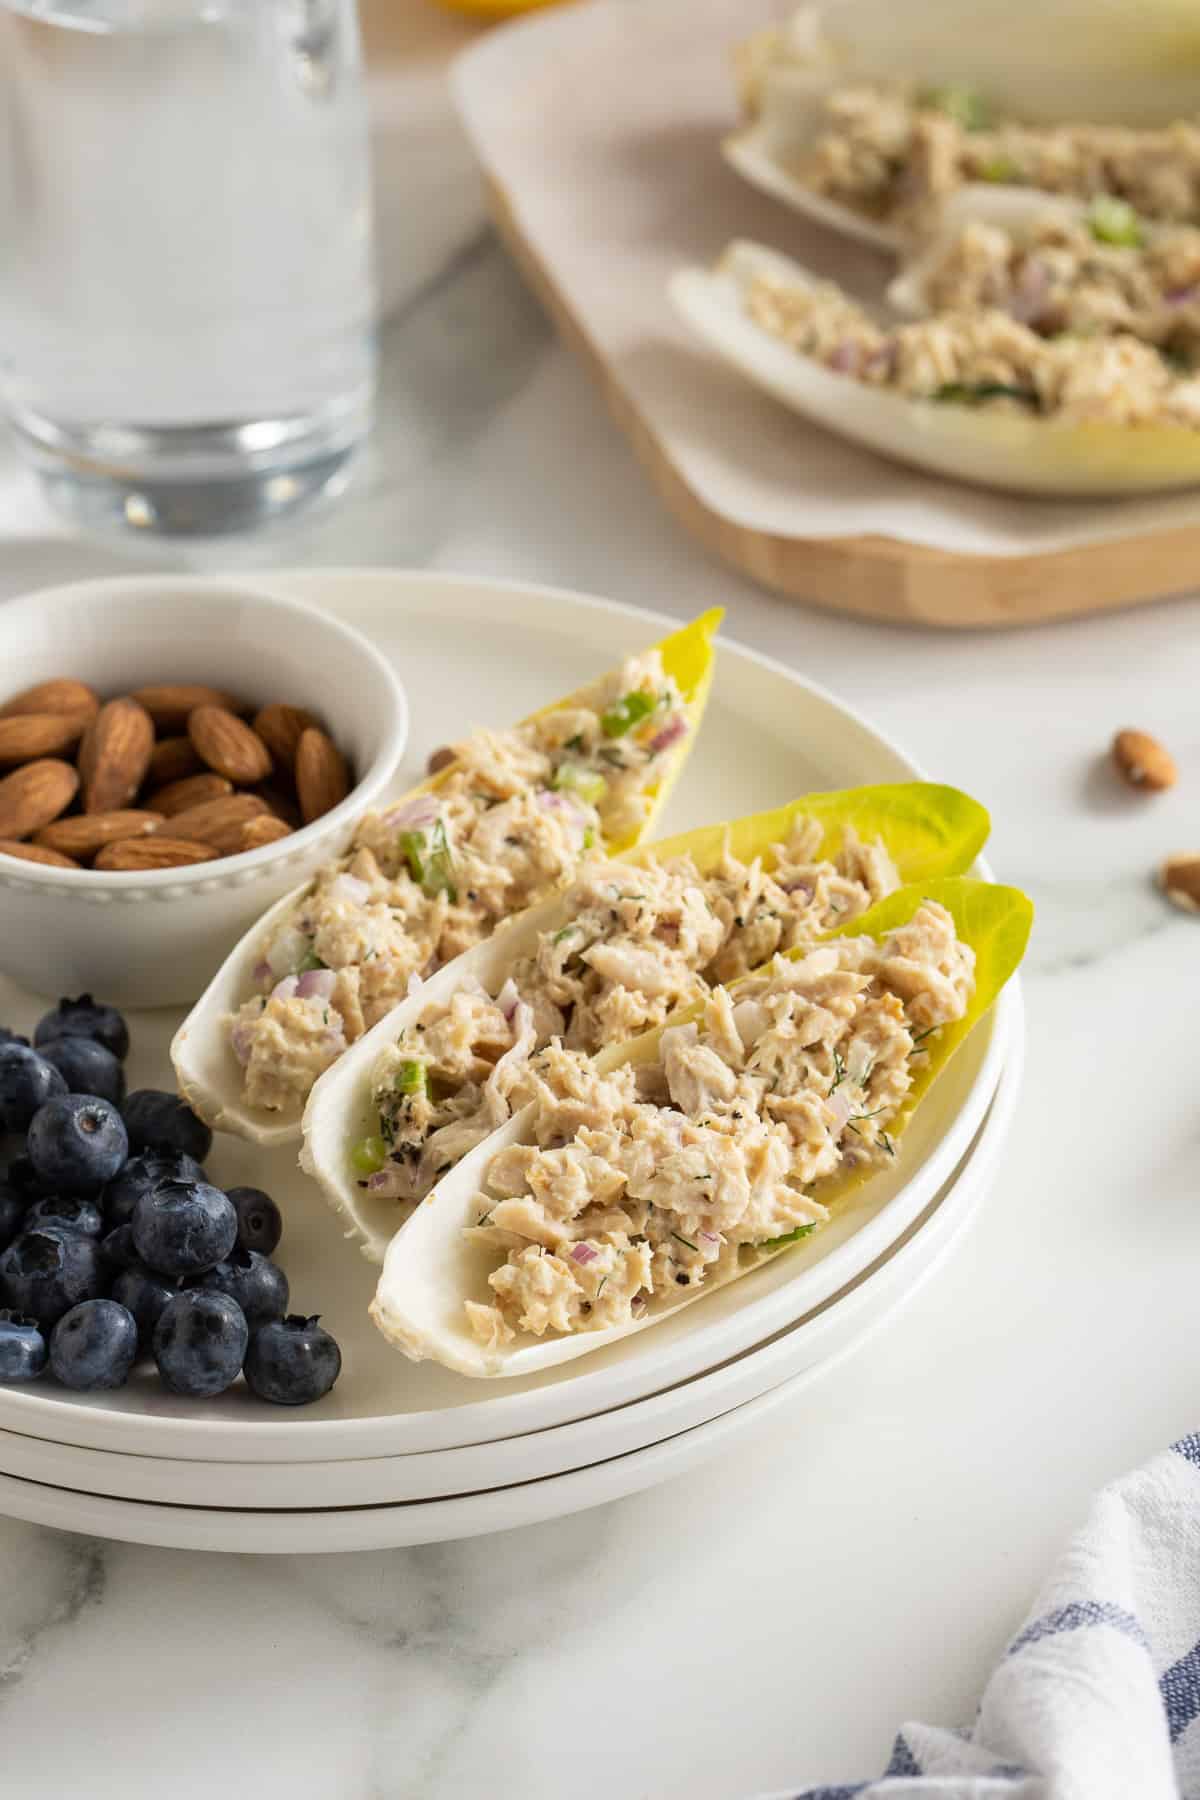 A side view of endive leaves stuffed with tuna salad on a white plate with blueberries and a small bowl of almonds.